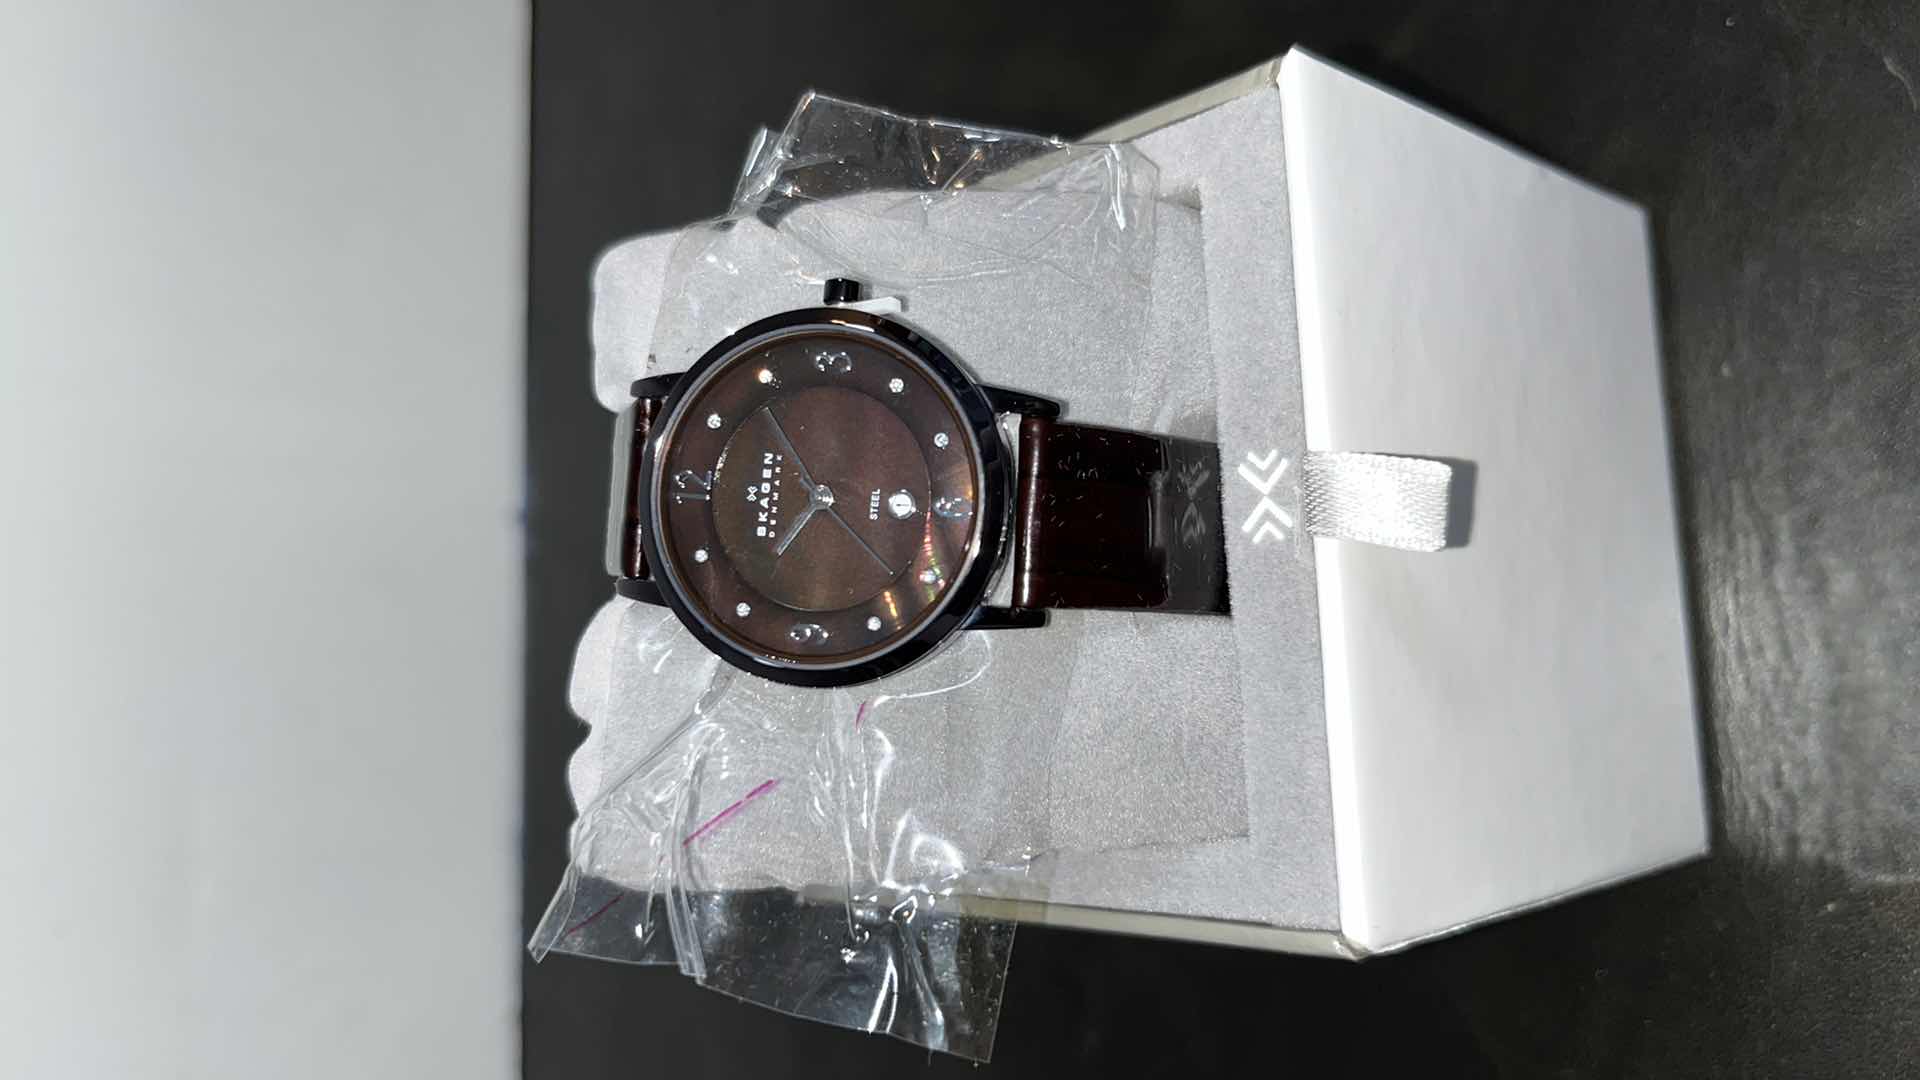 Photo 3 of NEW WOMENS SKAGEN STEEL WATCH W STAINLESS STEEL CASE & GENUINE LEATHER STRAP, PURPLE MOTHER OF PEARL INLAY W SWAROVSKI CRYSTALS, INCLUDES ORIGINAL BOX MODEL 574SDLD8A